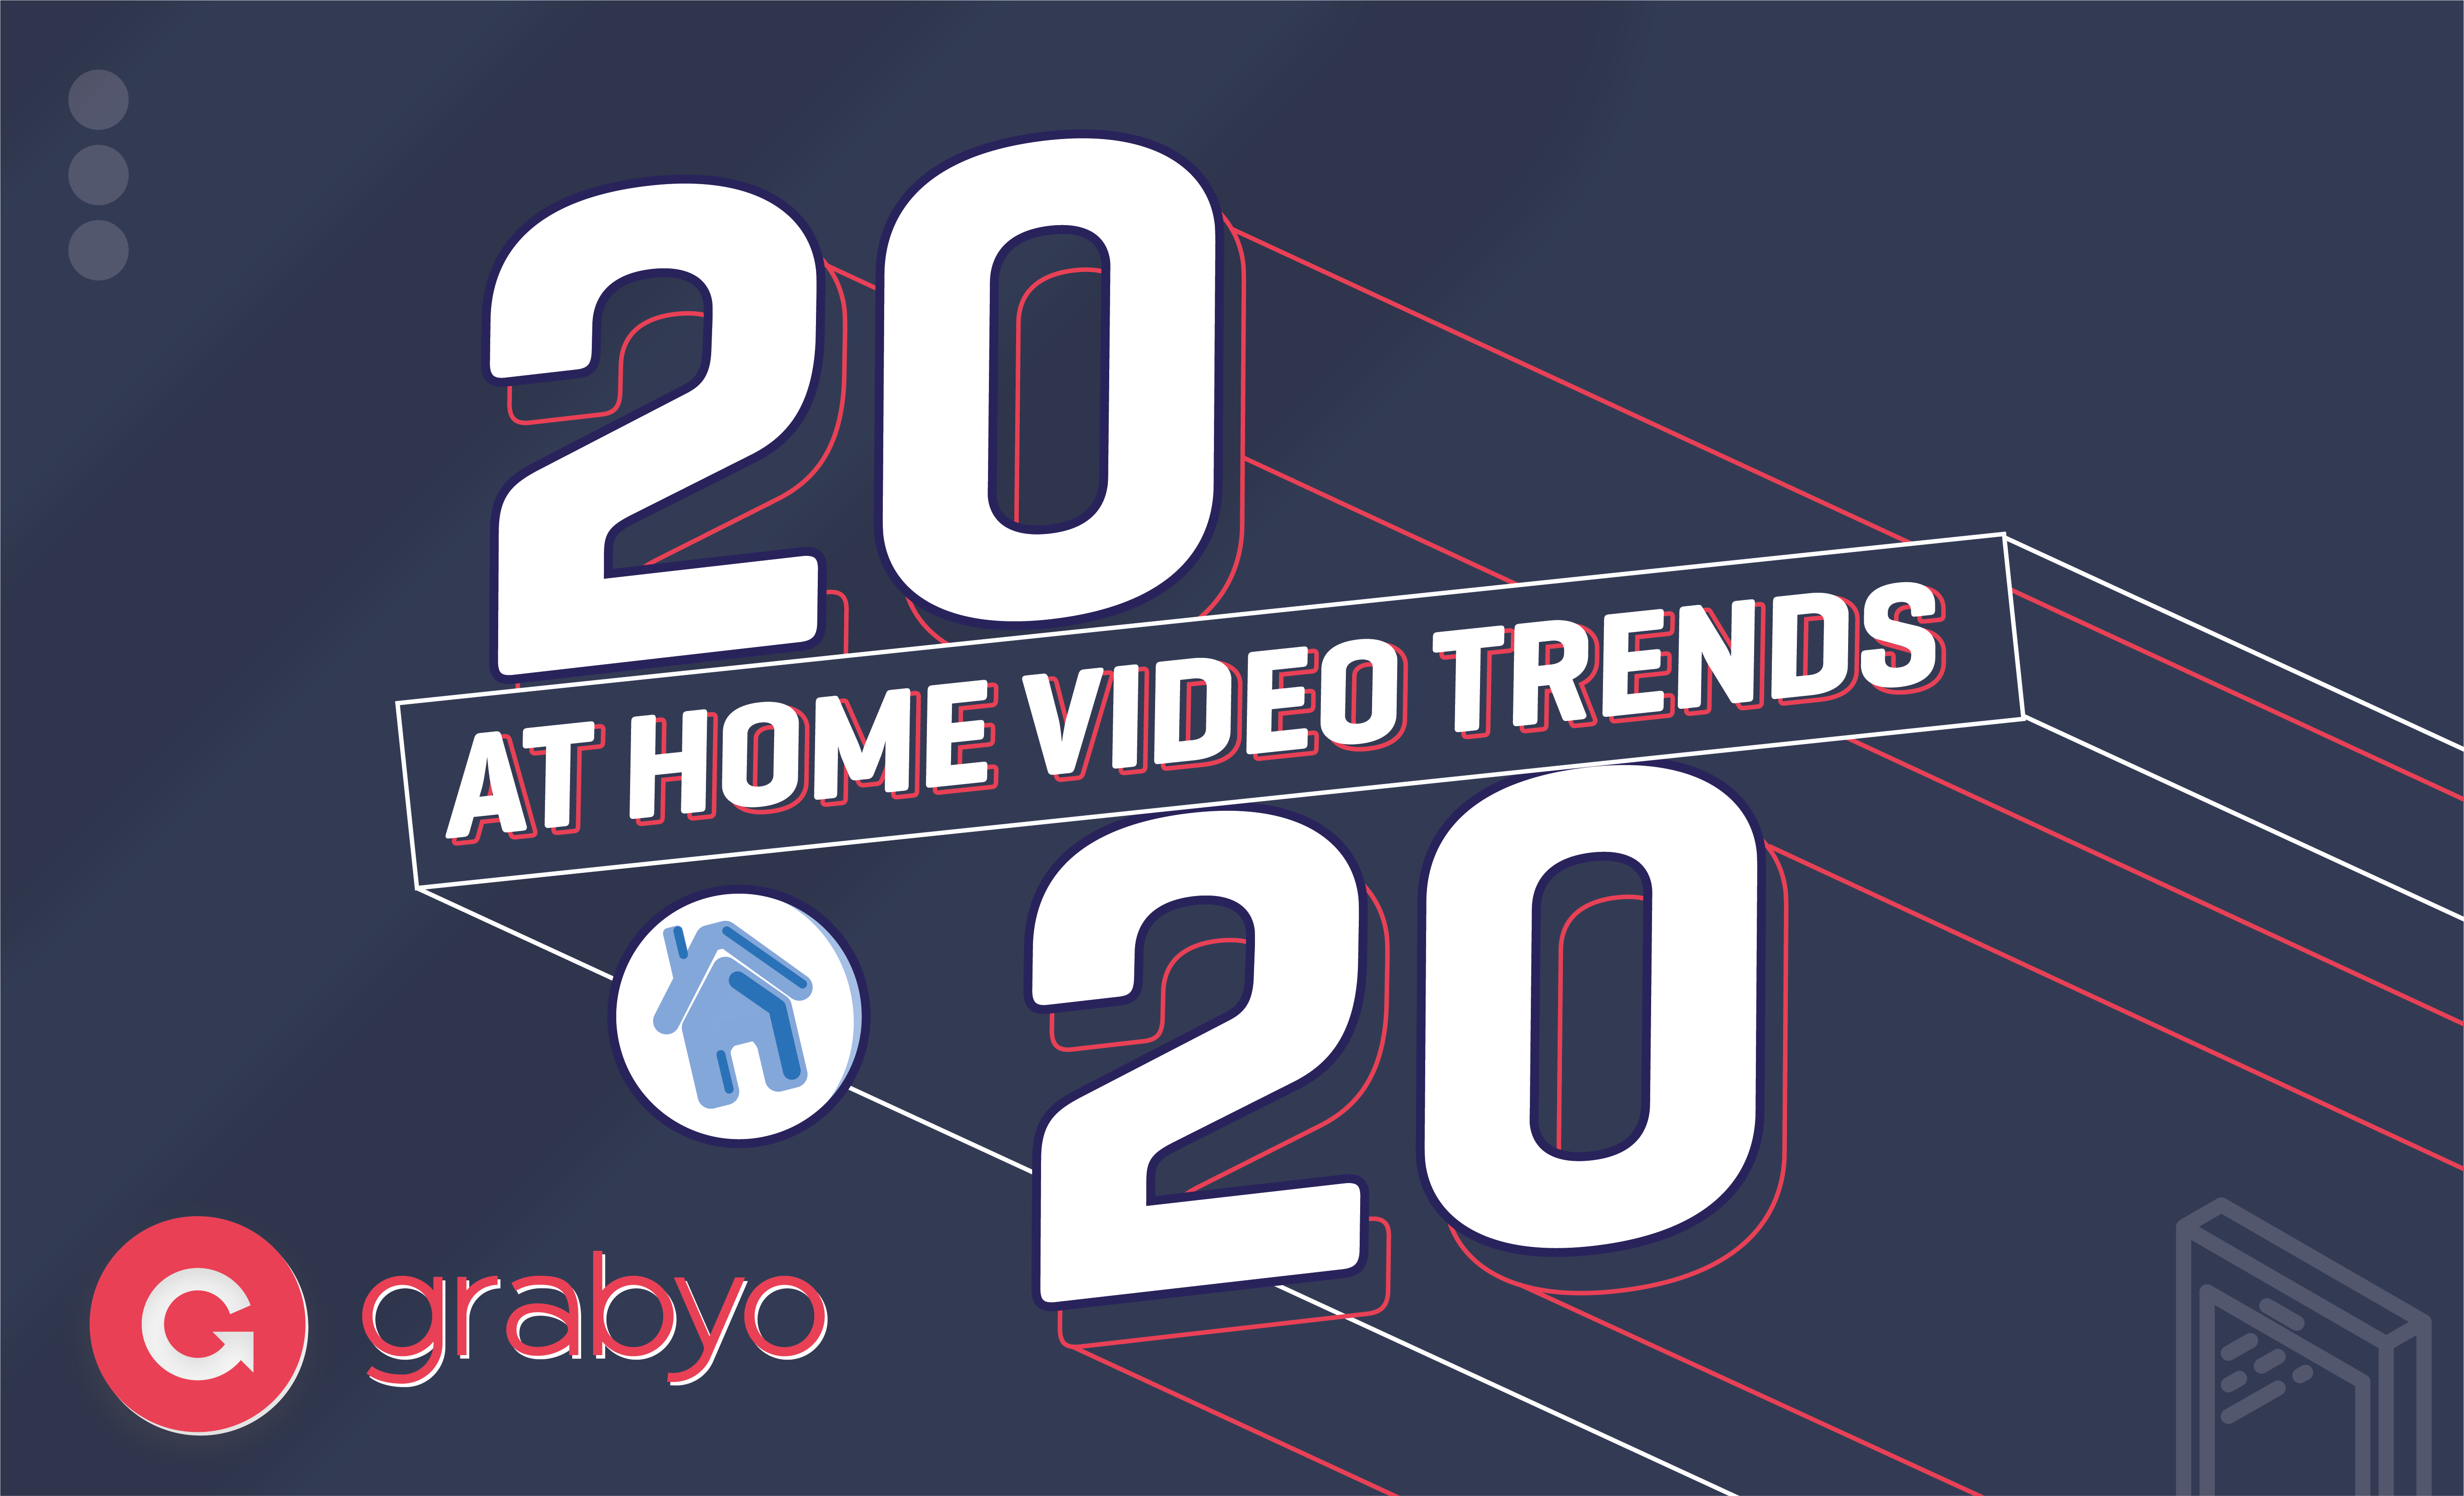 Grabyo’s At Home Video Trends 2020: Sports fans will switch to streaming